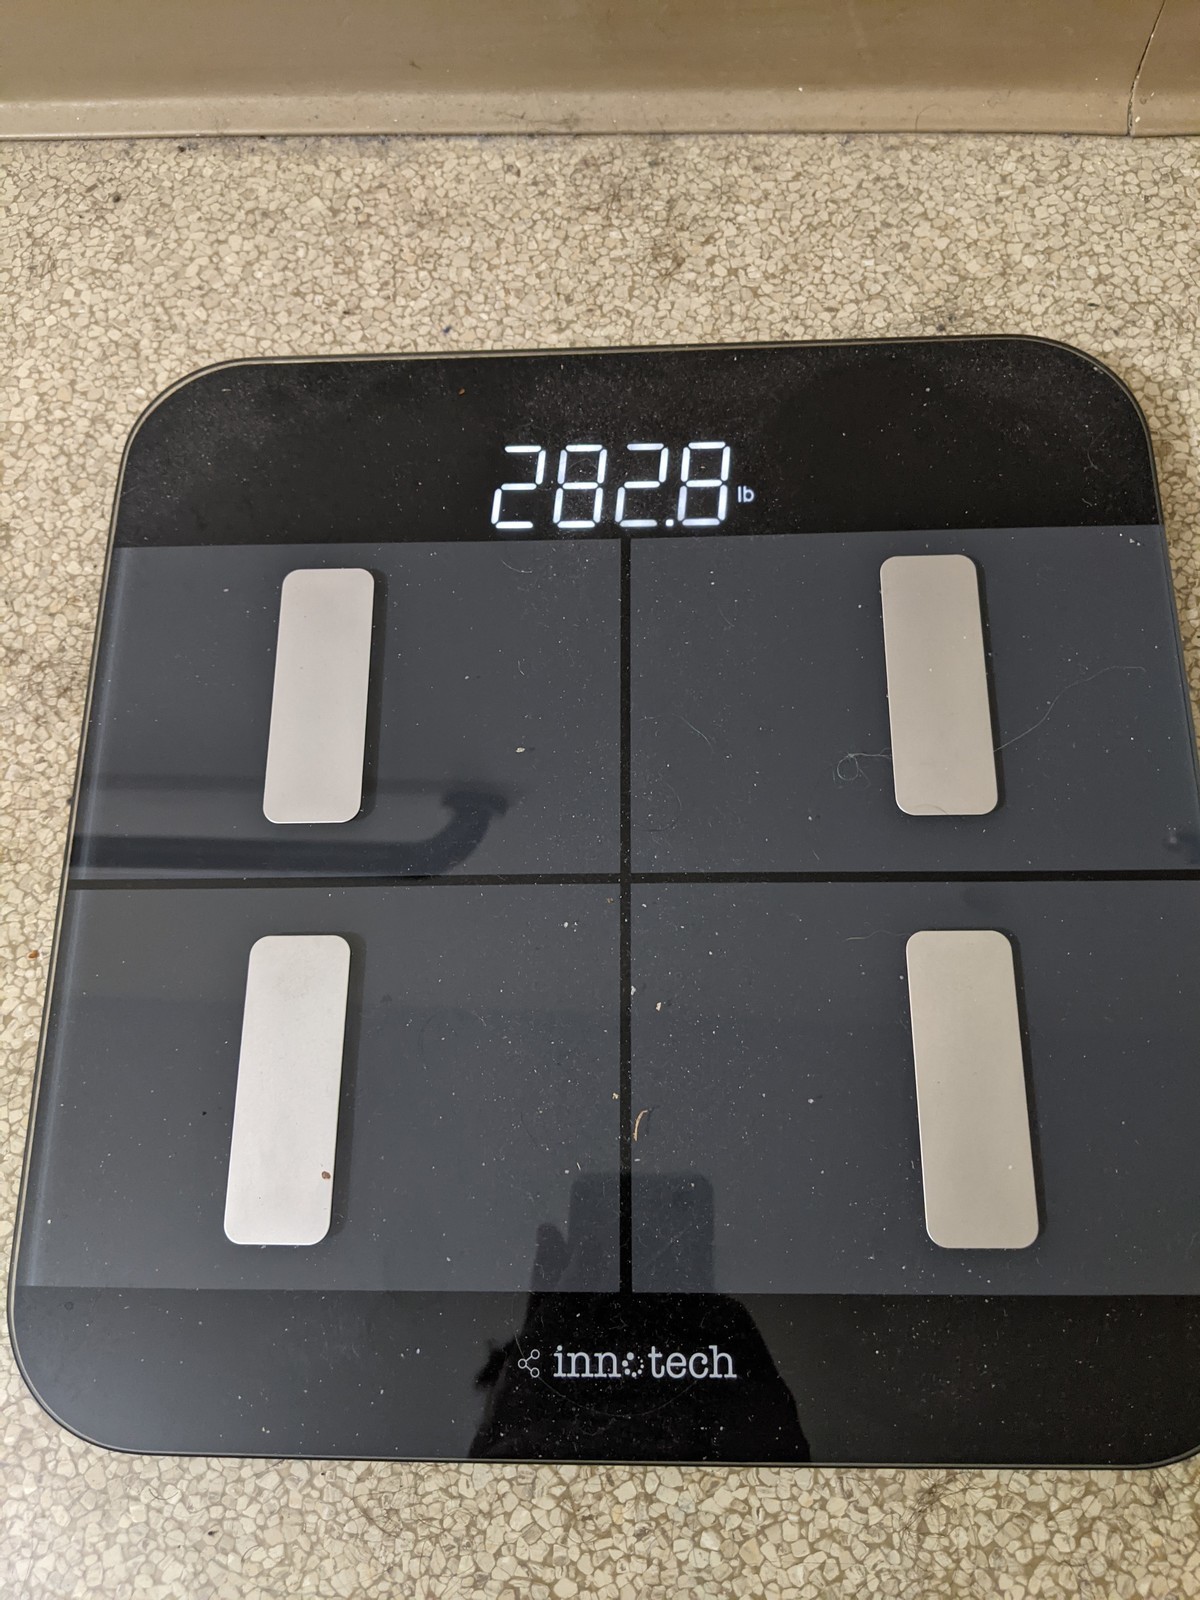 negative Goose. join list: WeightlossProgress (169 subs)Mention History Day late on the update but here we are. Still having issues dropping under 280, but I'm 